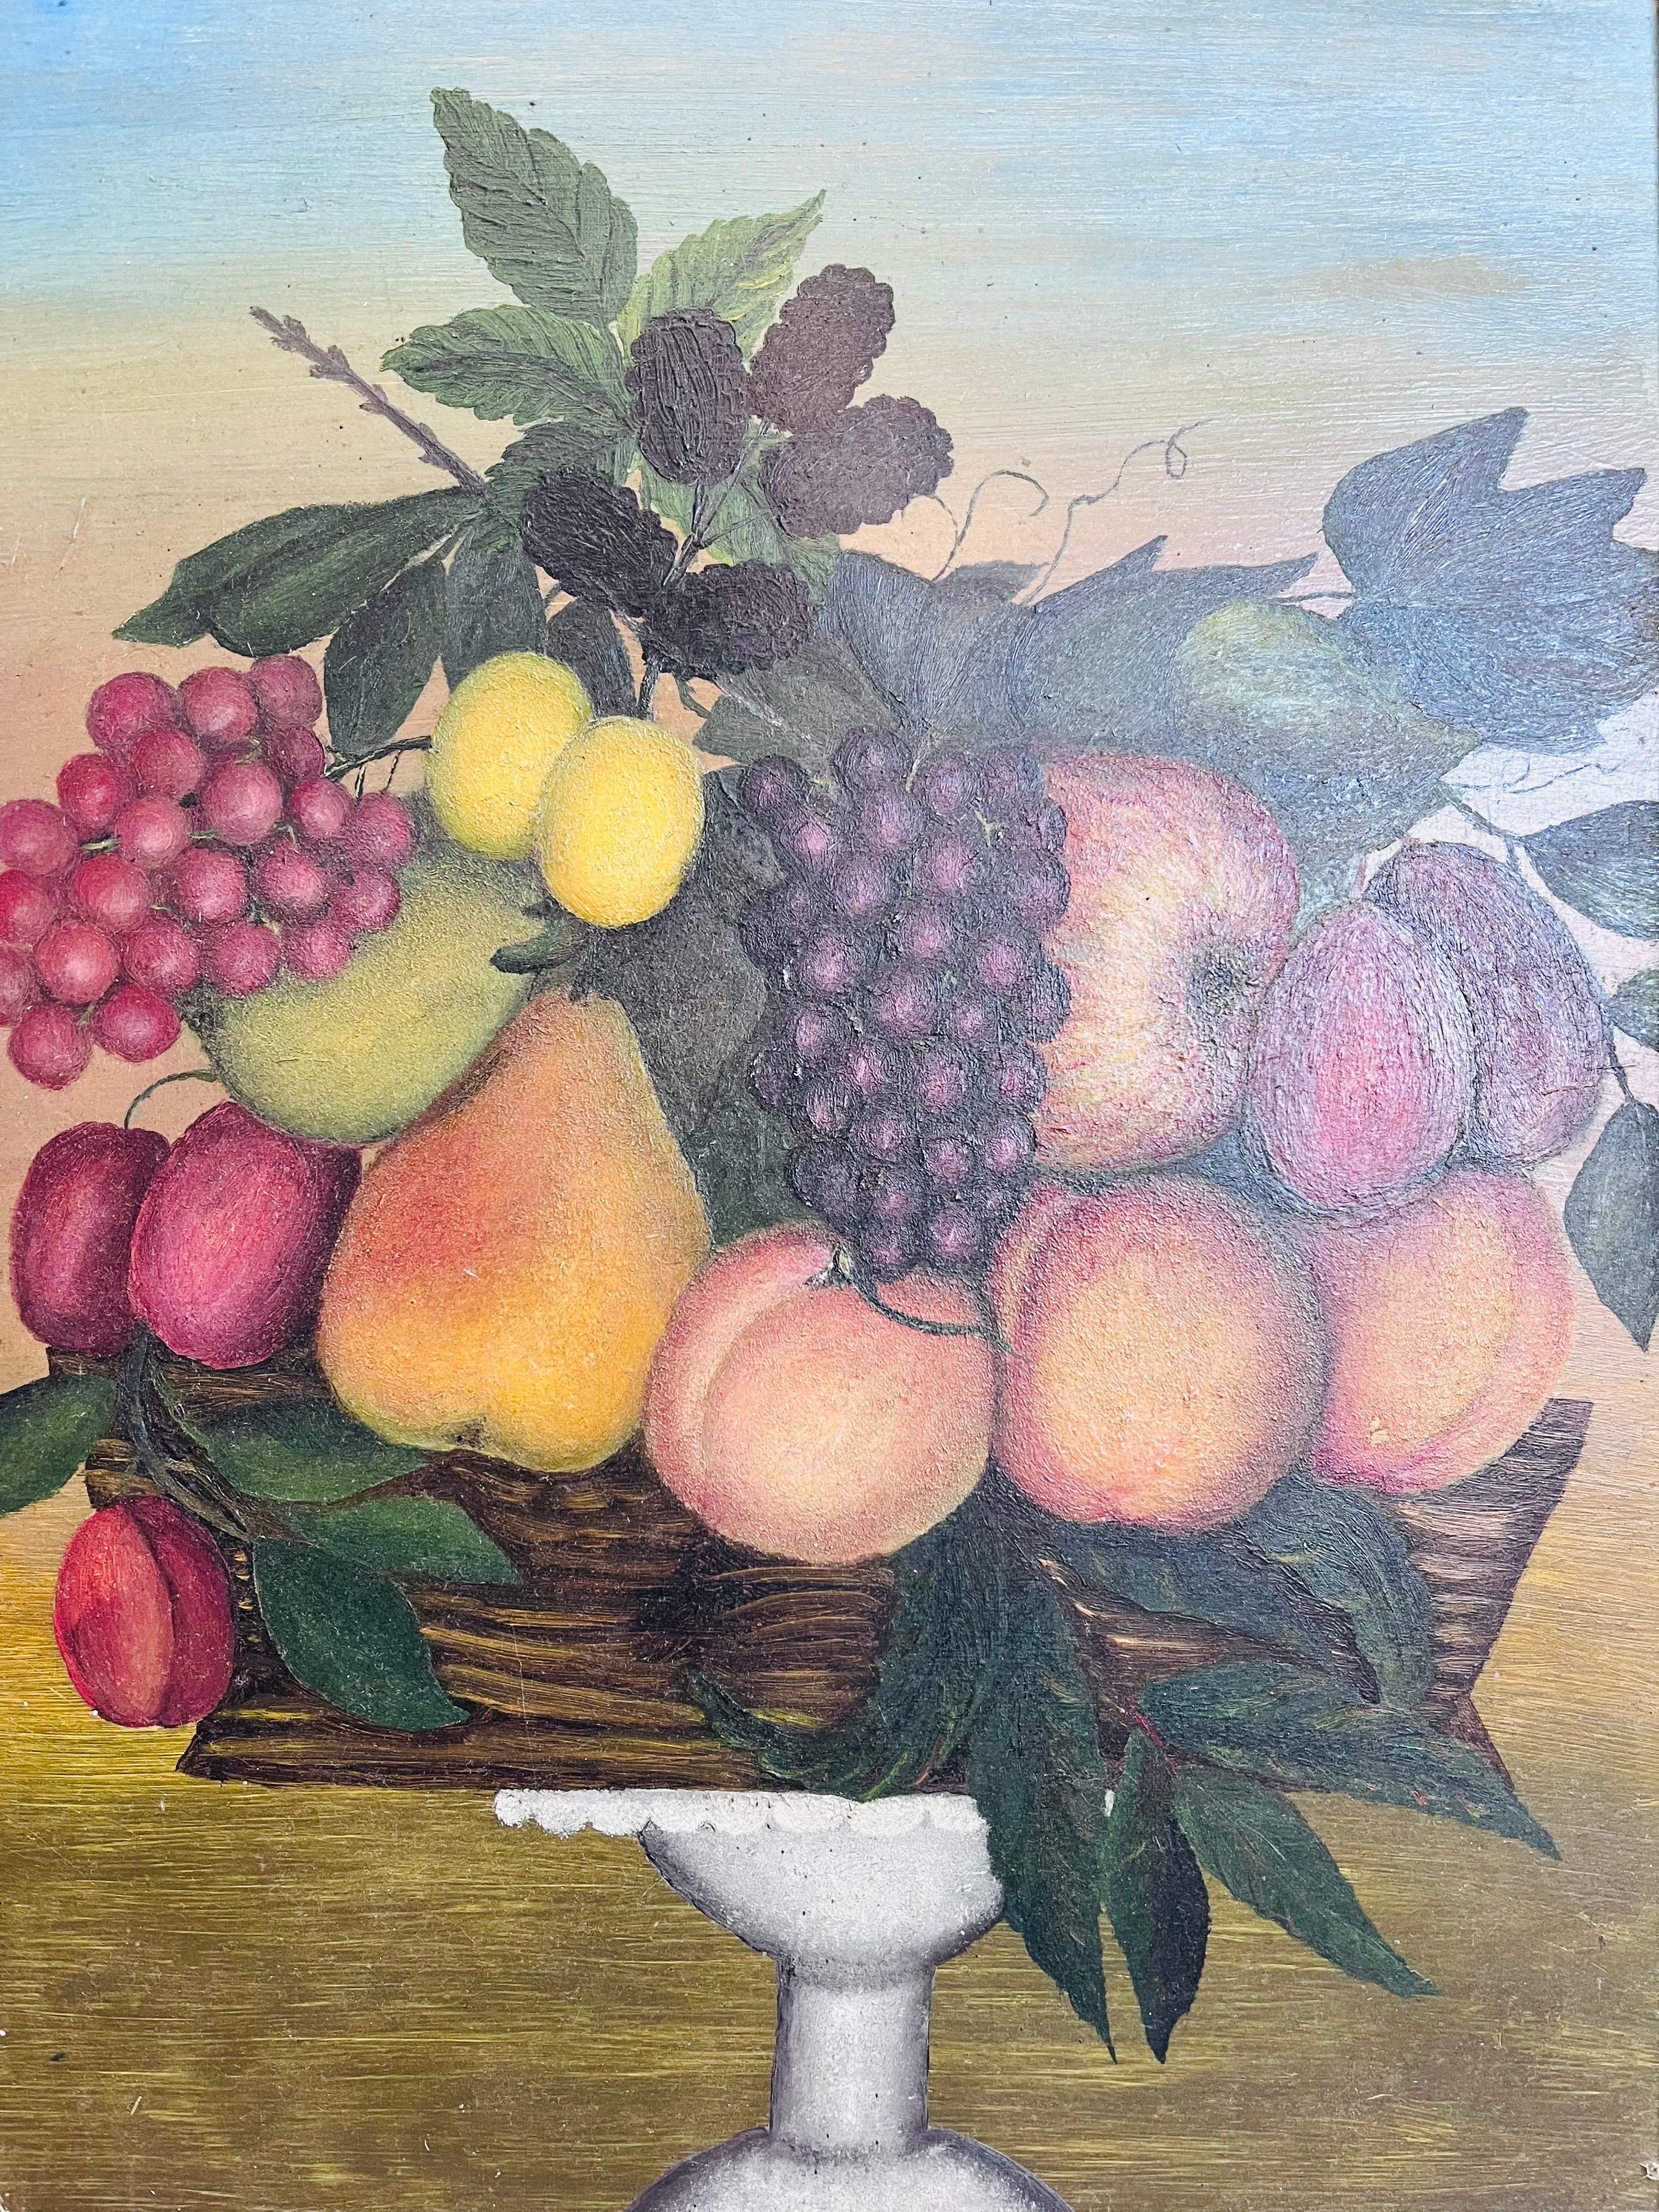 A unique mid to late 19th Century American naive folk art style painting of a still life of fruit in a woven basket all set atop a white footed compote. The painting is done in oils and is on a wood support. The painting is presented in a period,